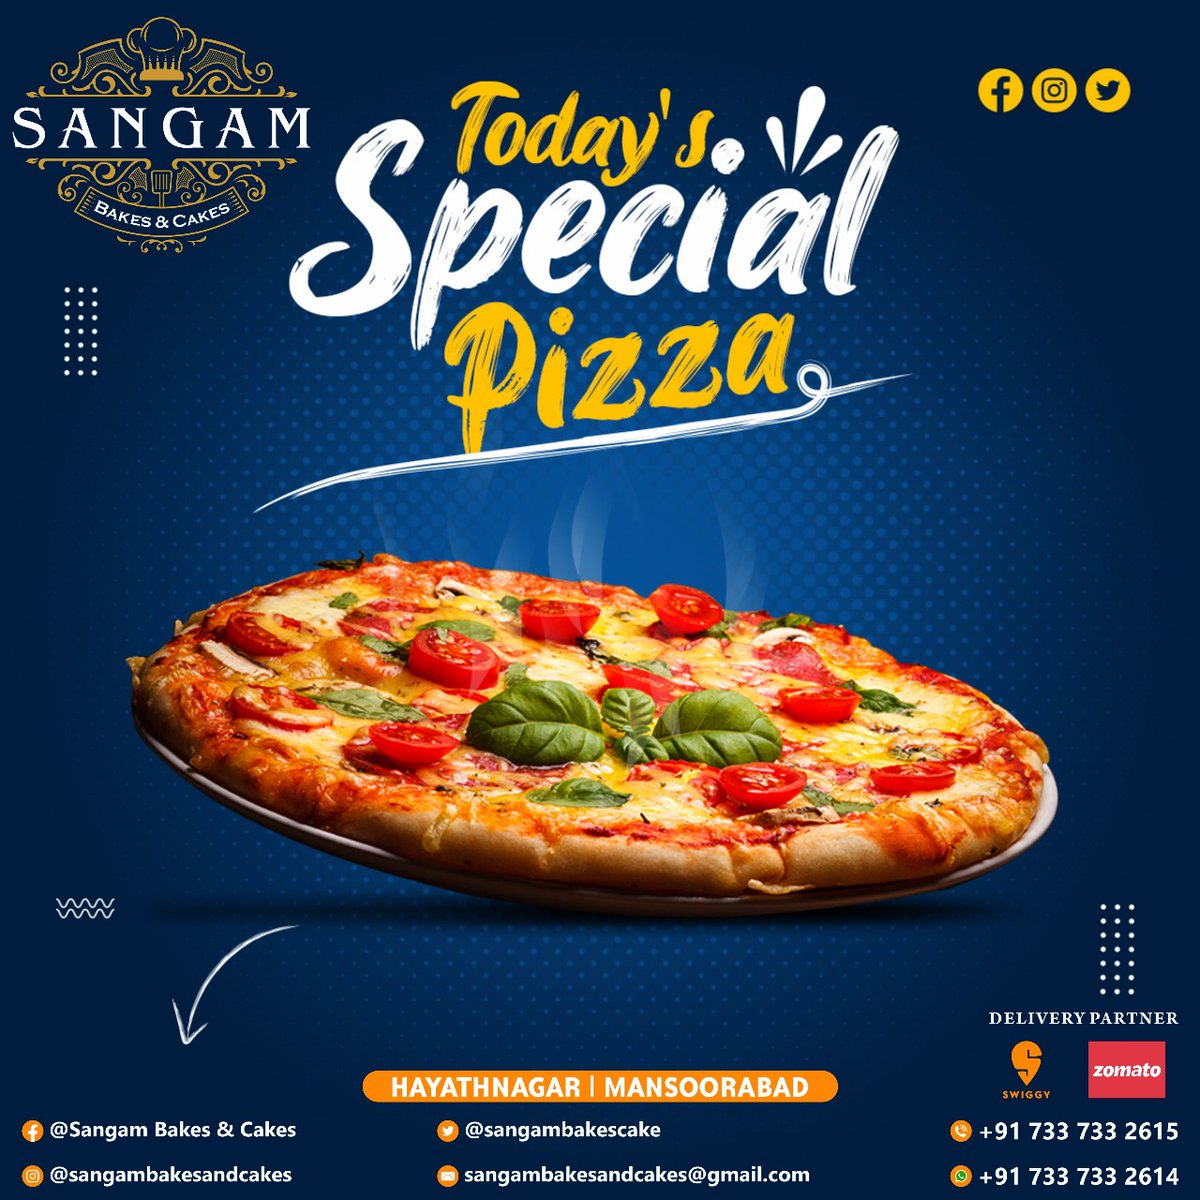 Today's Special Pizza! @sangambakescake

#pizza #pizzatime #pizzalover #pizzahut #pizzas #pizzaria #pizzalovers #pizzaparty #pizzanapoletana #pizzalove #ilovepizza #homemadepizza #pizzagram #pizzaislife #pizzanight   #food #foodporn #foodblogger #sangam